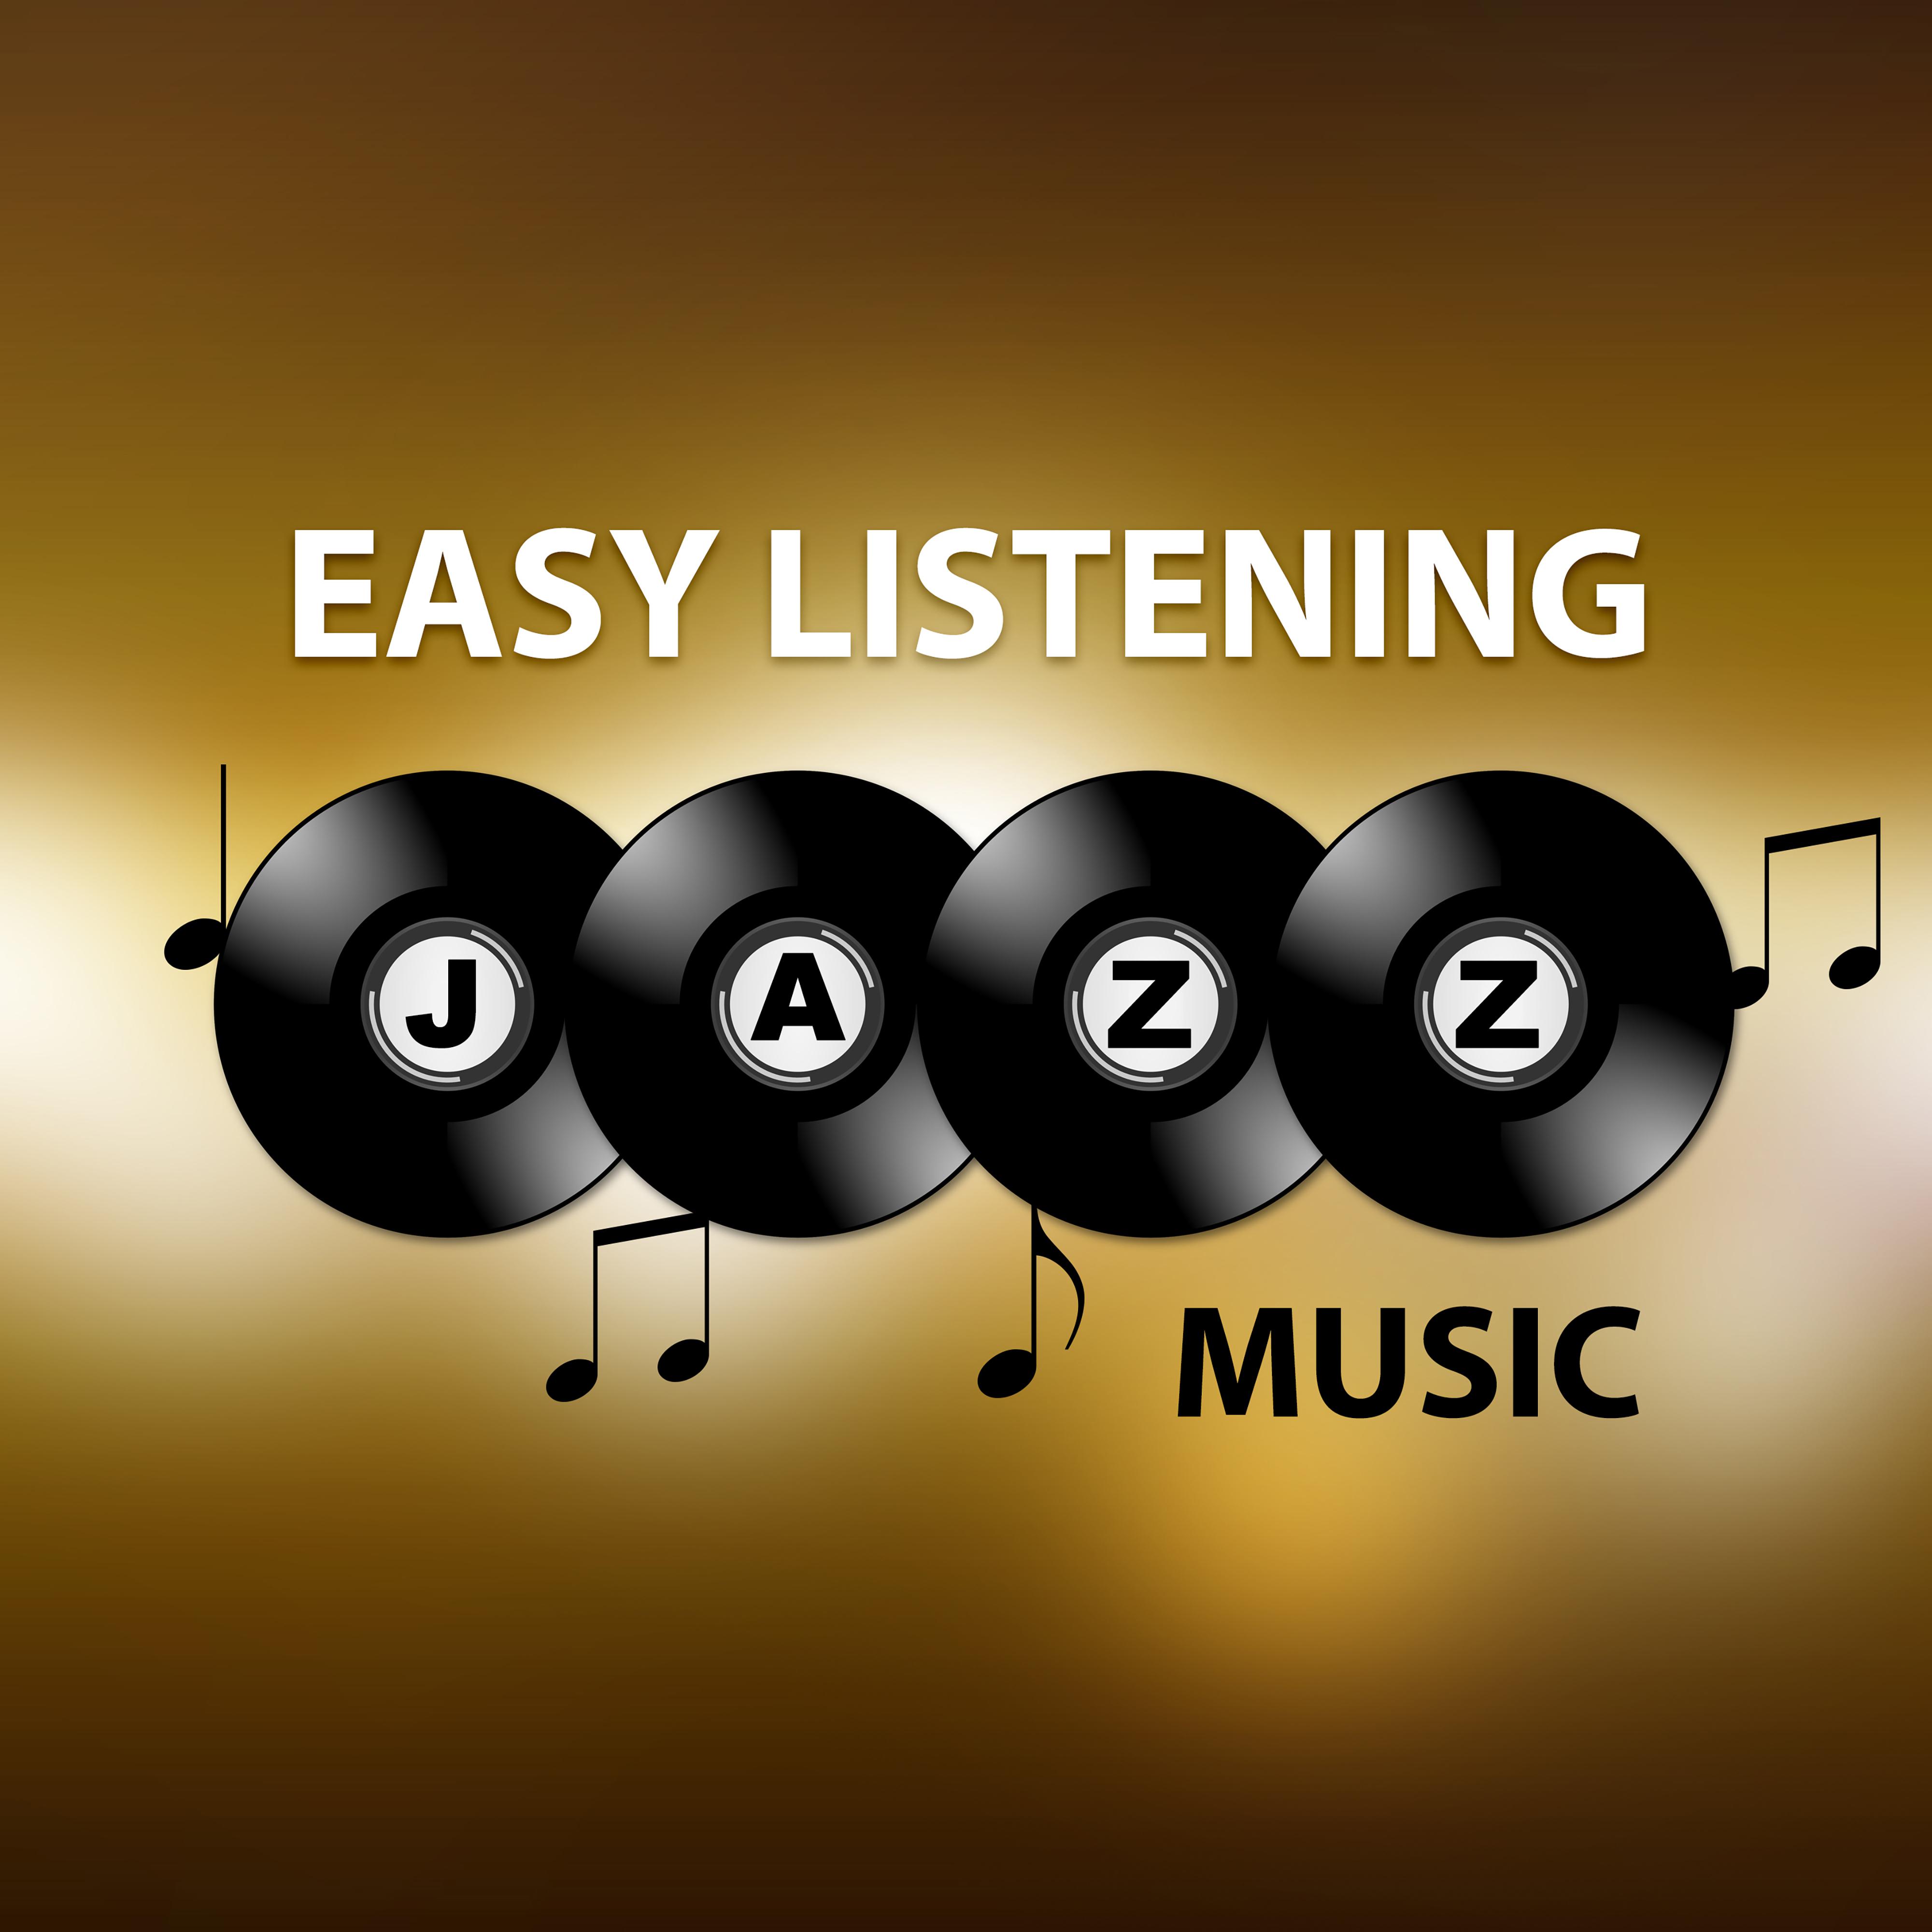 Easy Listening Jazz Music – Relaxing Music, Sounds to Rest, Moonlight Jazz, Mellow Music